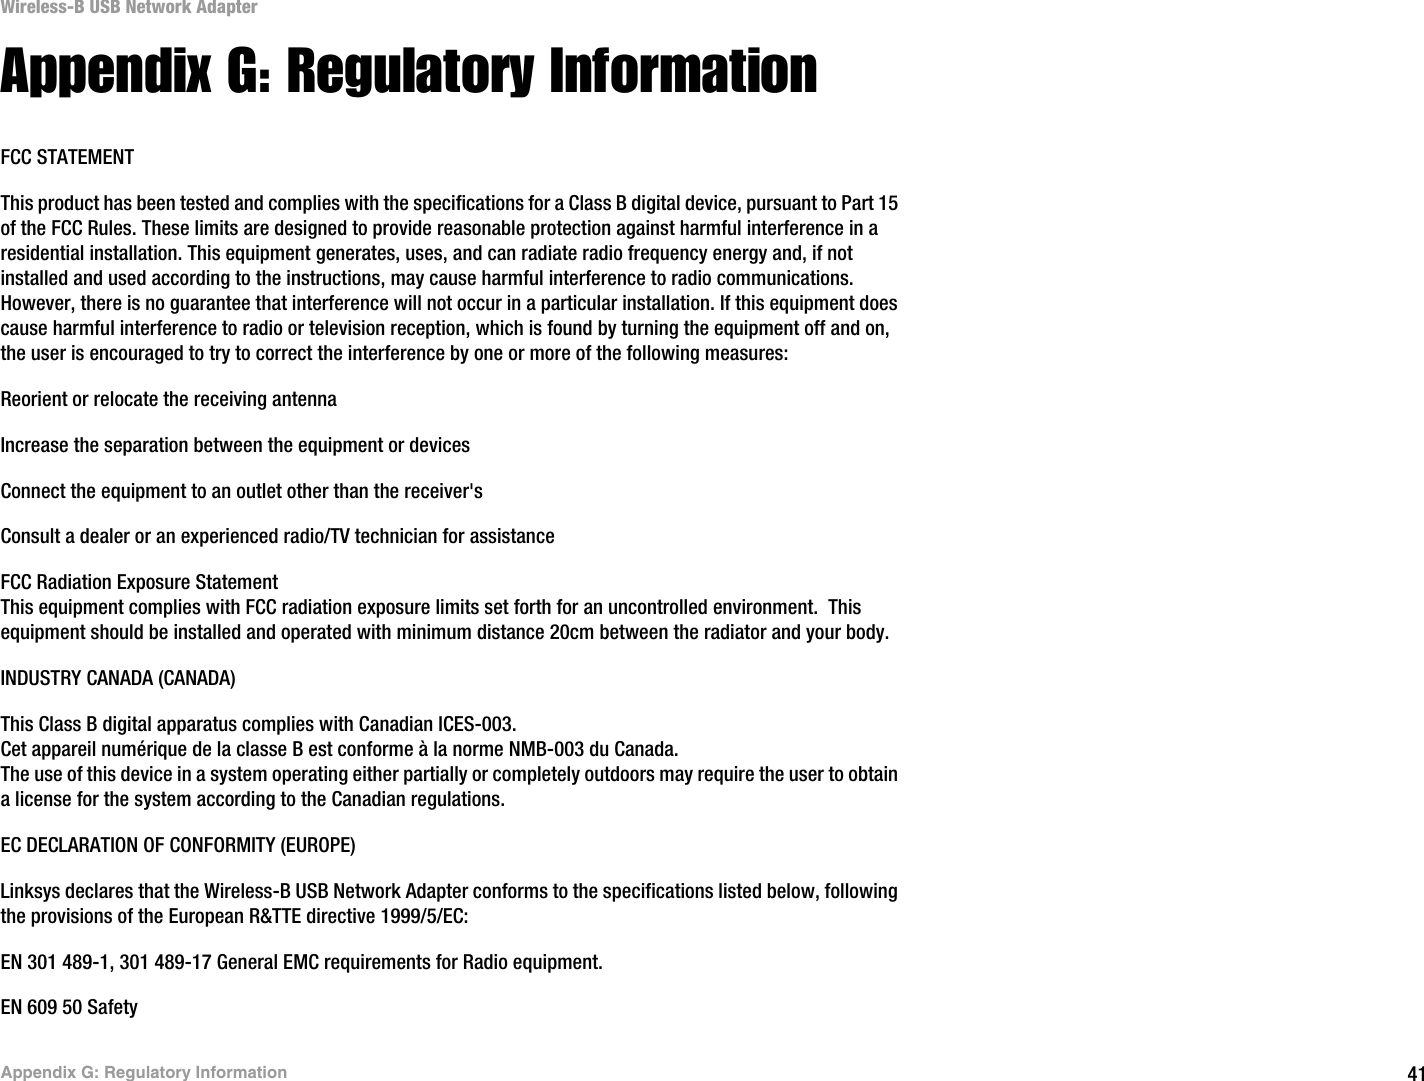 41Appendix G: Regulatory InformationWireless-B USB Network AdapterAppendix G: Regulatory InformationFCC STATEMENTThis product has been tested and complies with the specifications for a Class B digital device, pursuant to Part 15 of the FCC Rules. These limits are designed to provide reasonable protection against harmful interference in a residential installation. This equipment generates, uses, and can radiate radio frequency energy and, if not installed and used according to the instructions, may cause harmful interference to radio communications. However, there is no guarantee that interference will not occur in a particular installation. If this equipment does cause harmful interference to radio or television reception, which is found by turning the equipment off and on, the user is encouraged to try to correct the interference by one or more of the following measures:Reorient or relocate the receiving antennaIncrease the separation between the equipment or devicesConnect the equipment to an outlet other than the receiver&apos;sConsult a dealer or an experienced radio/TV technician for assistanceFCC Radiation Exposure StatementThis equipment complies with FCC radiation exposure limits set forth for an uncontrolled environment.  This equipment should be installed and operated with minimum distance 20cm between the radiator and your body.INDUSTRY CANADA (CANADA)This Class B digital apparatus complies with Canadian ICES-003.Cet appareil numérique de la classe B est conforme à la norme NMB-003 du Canada.The use of this device in a system operating either partially or completely outdoors may require the user to obtain a license for the system according to the Canadian regulations.EC DECLARATION OF CONFORMITY (EUROPE)Linksys declares that the Wireless-B USB Network Adapter conforms to the specifications listed below, following the provisions of the European R&amp;TTE directive 1999/5/EC: EN 301 489-1, 301 489-17 General EMC requirements for Radio equipment.EN 609 50 Safety